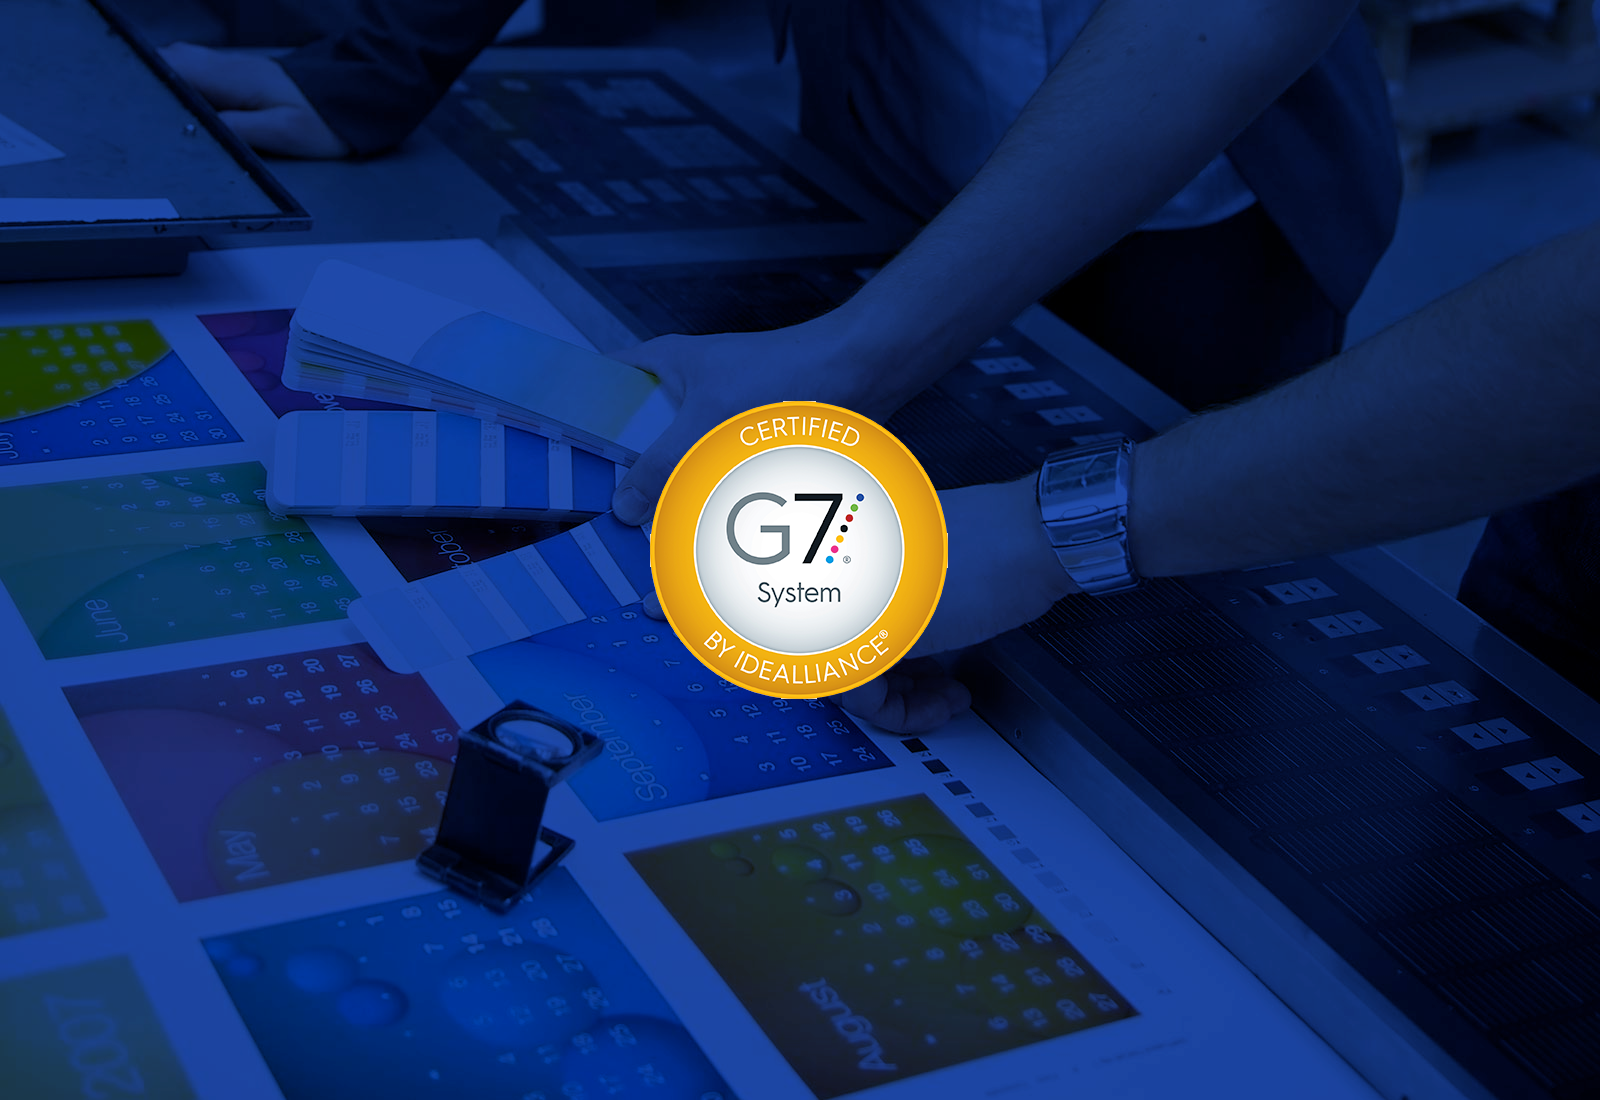 What is the G7 Certification?